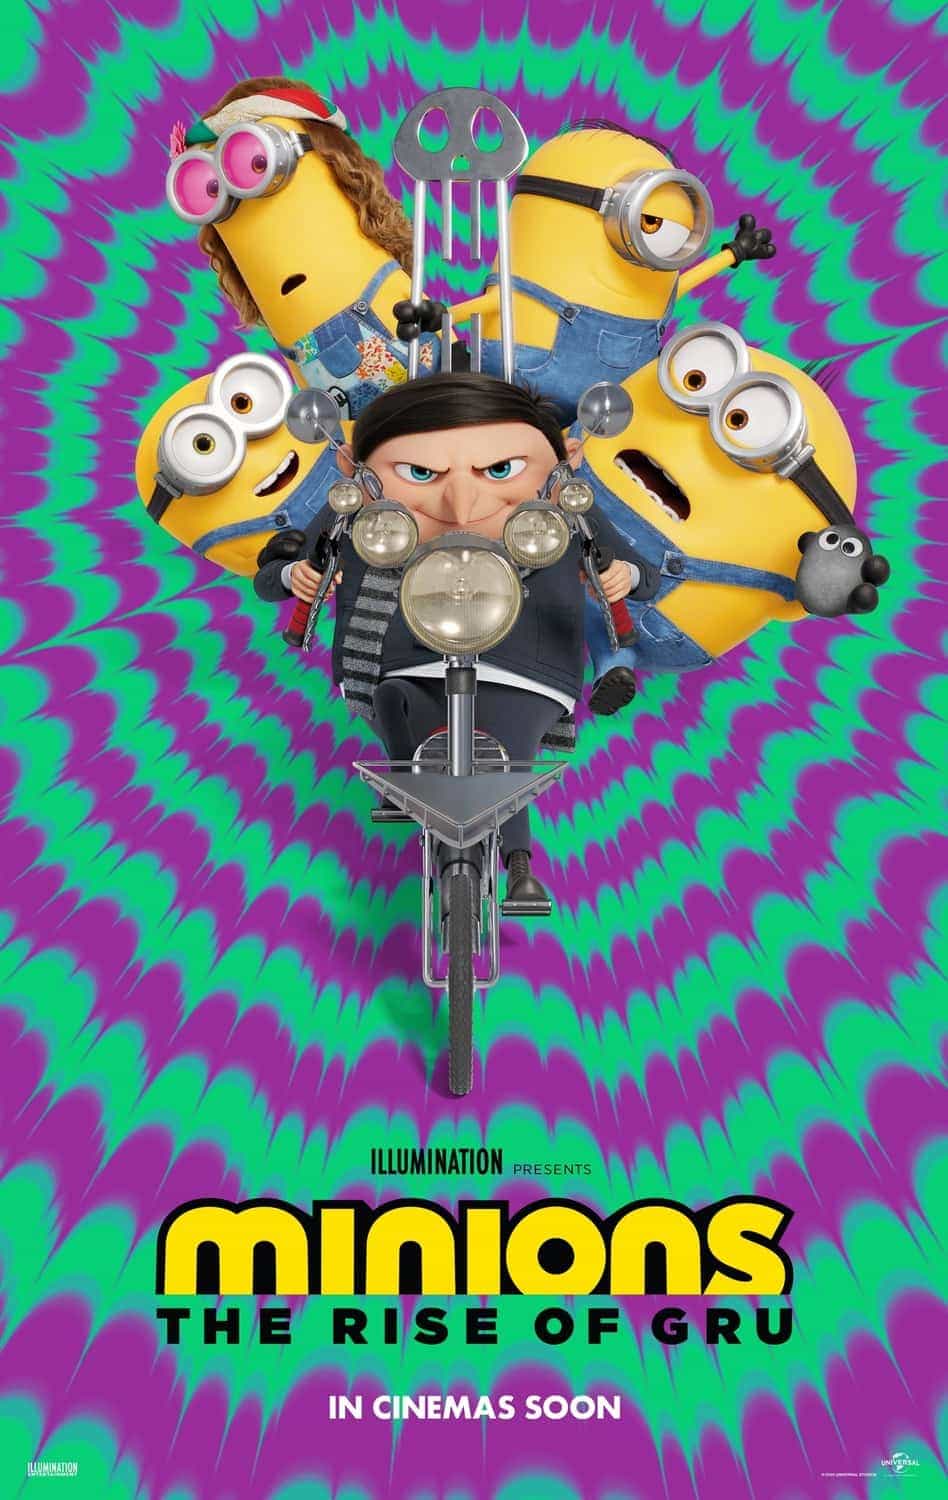 New movie poster release for Minions: The Rise of Gru #minionstheriseofgru